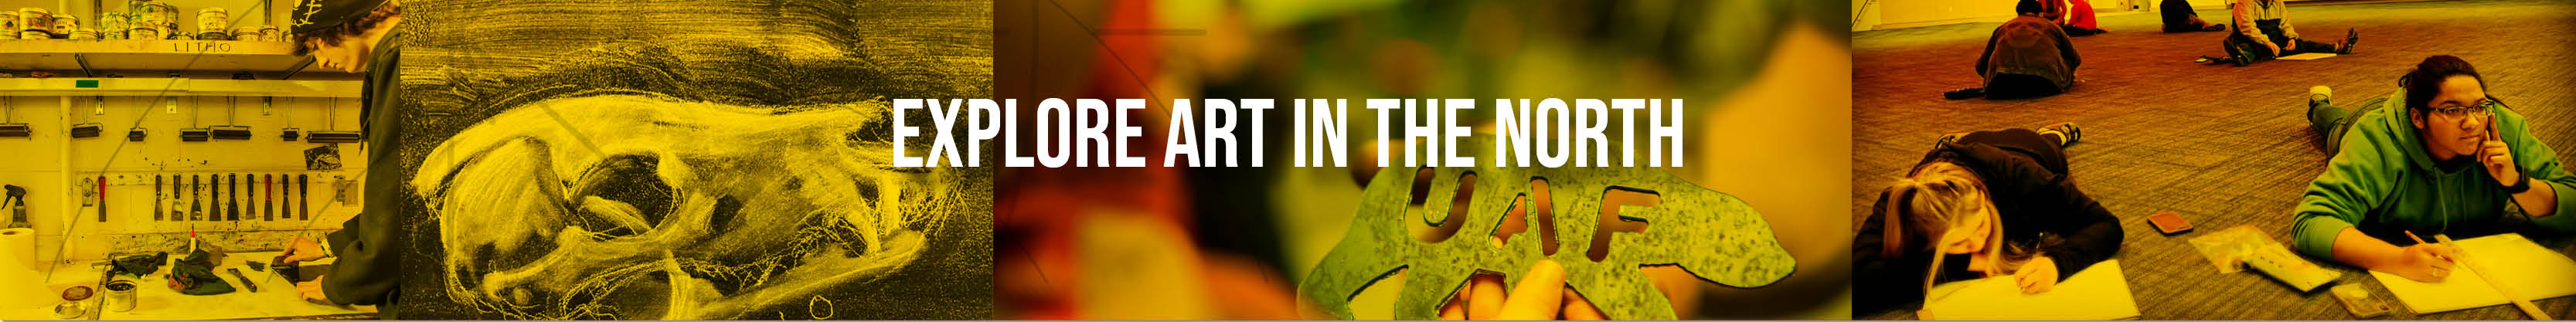 Explore the boundaries of your creativity. Study Art in the North.